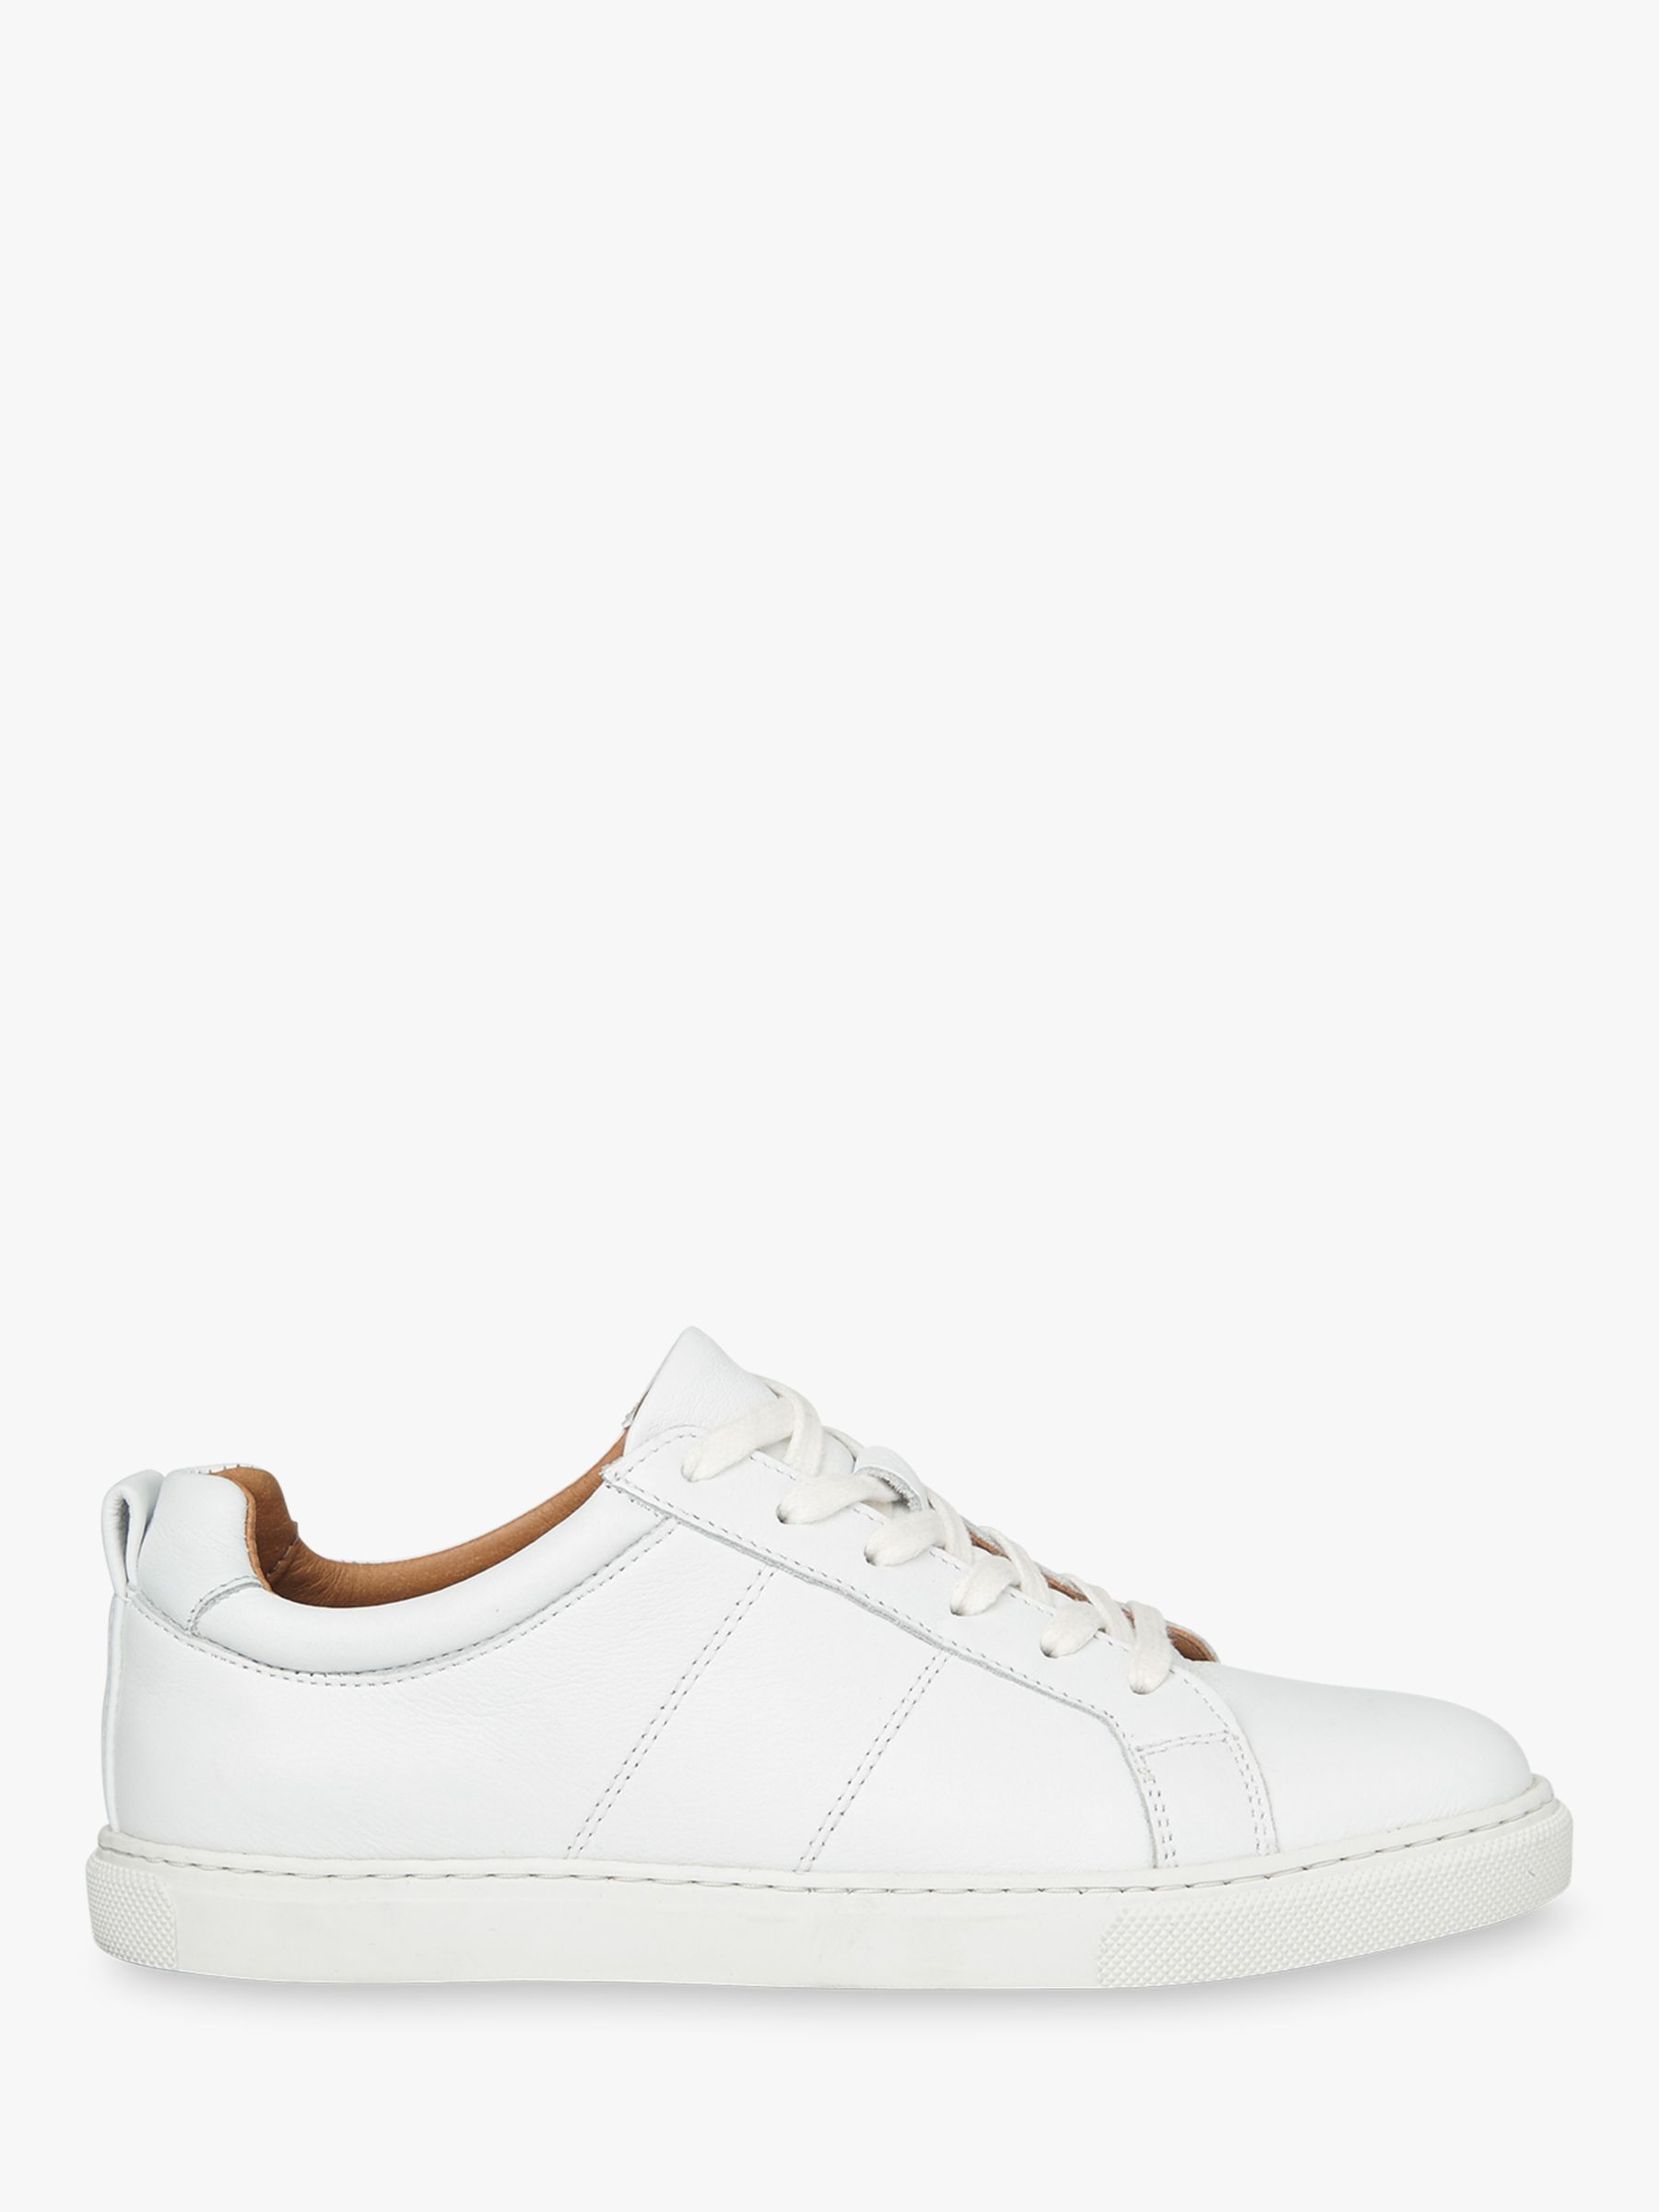 Whistles Koki Lace Up Leather Trainers, White at John Lewis & Partners